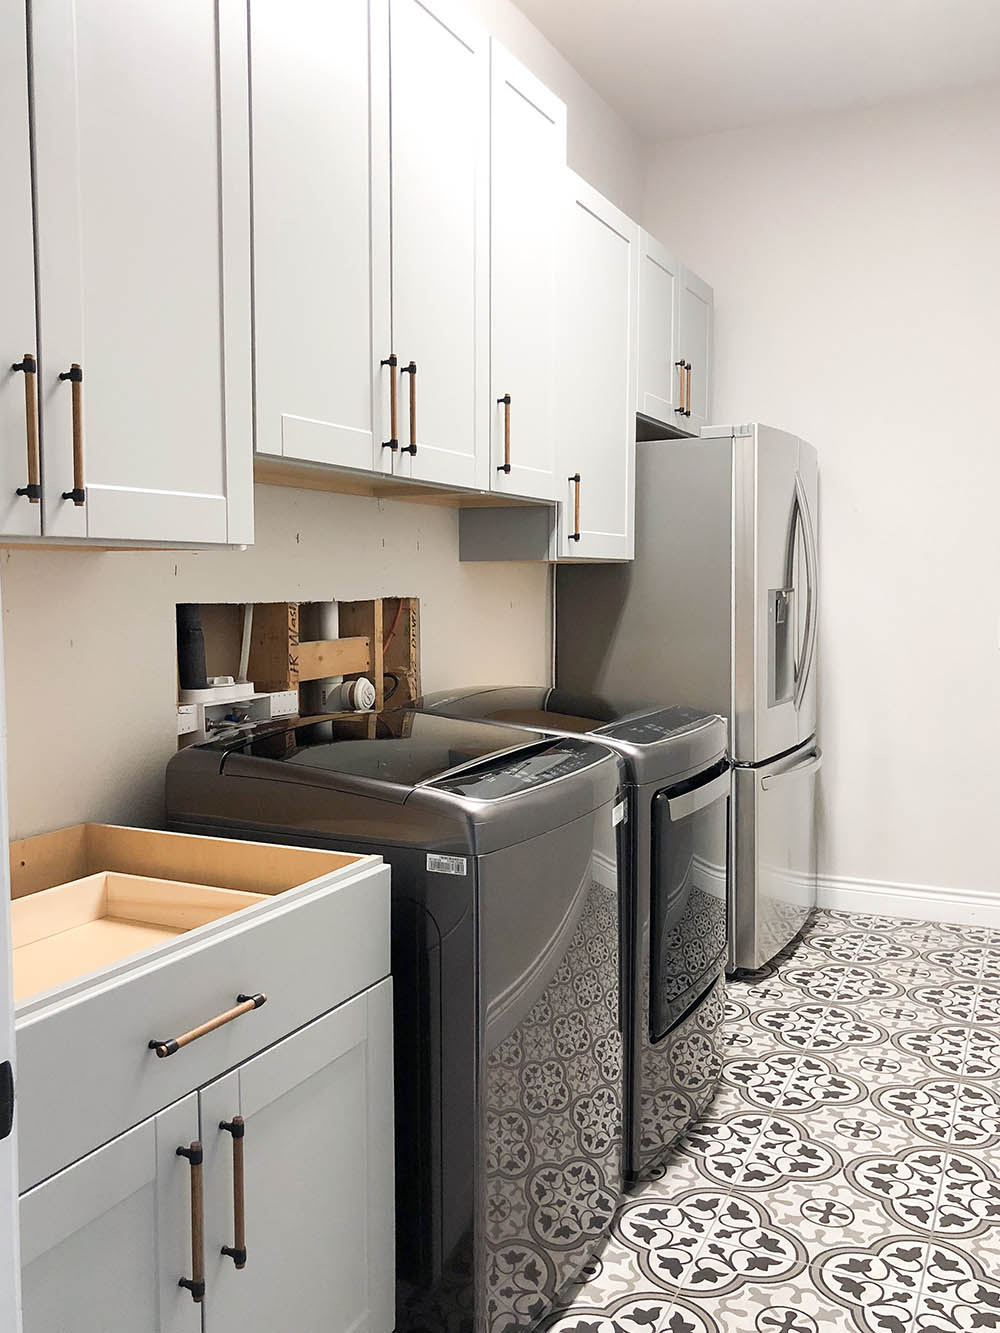 Laundry room with mosaic tiled flooring, black washer and dryer, upper and lower grey cabinets,  and a refrigerator. 